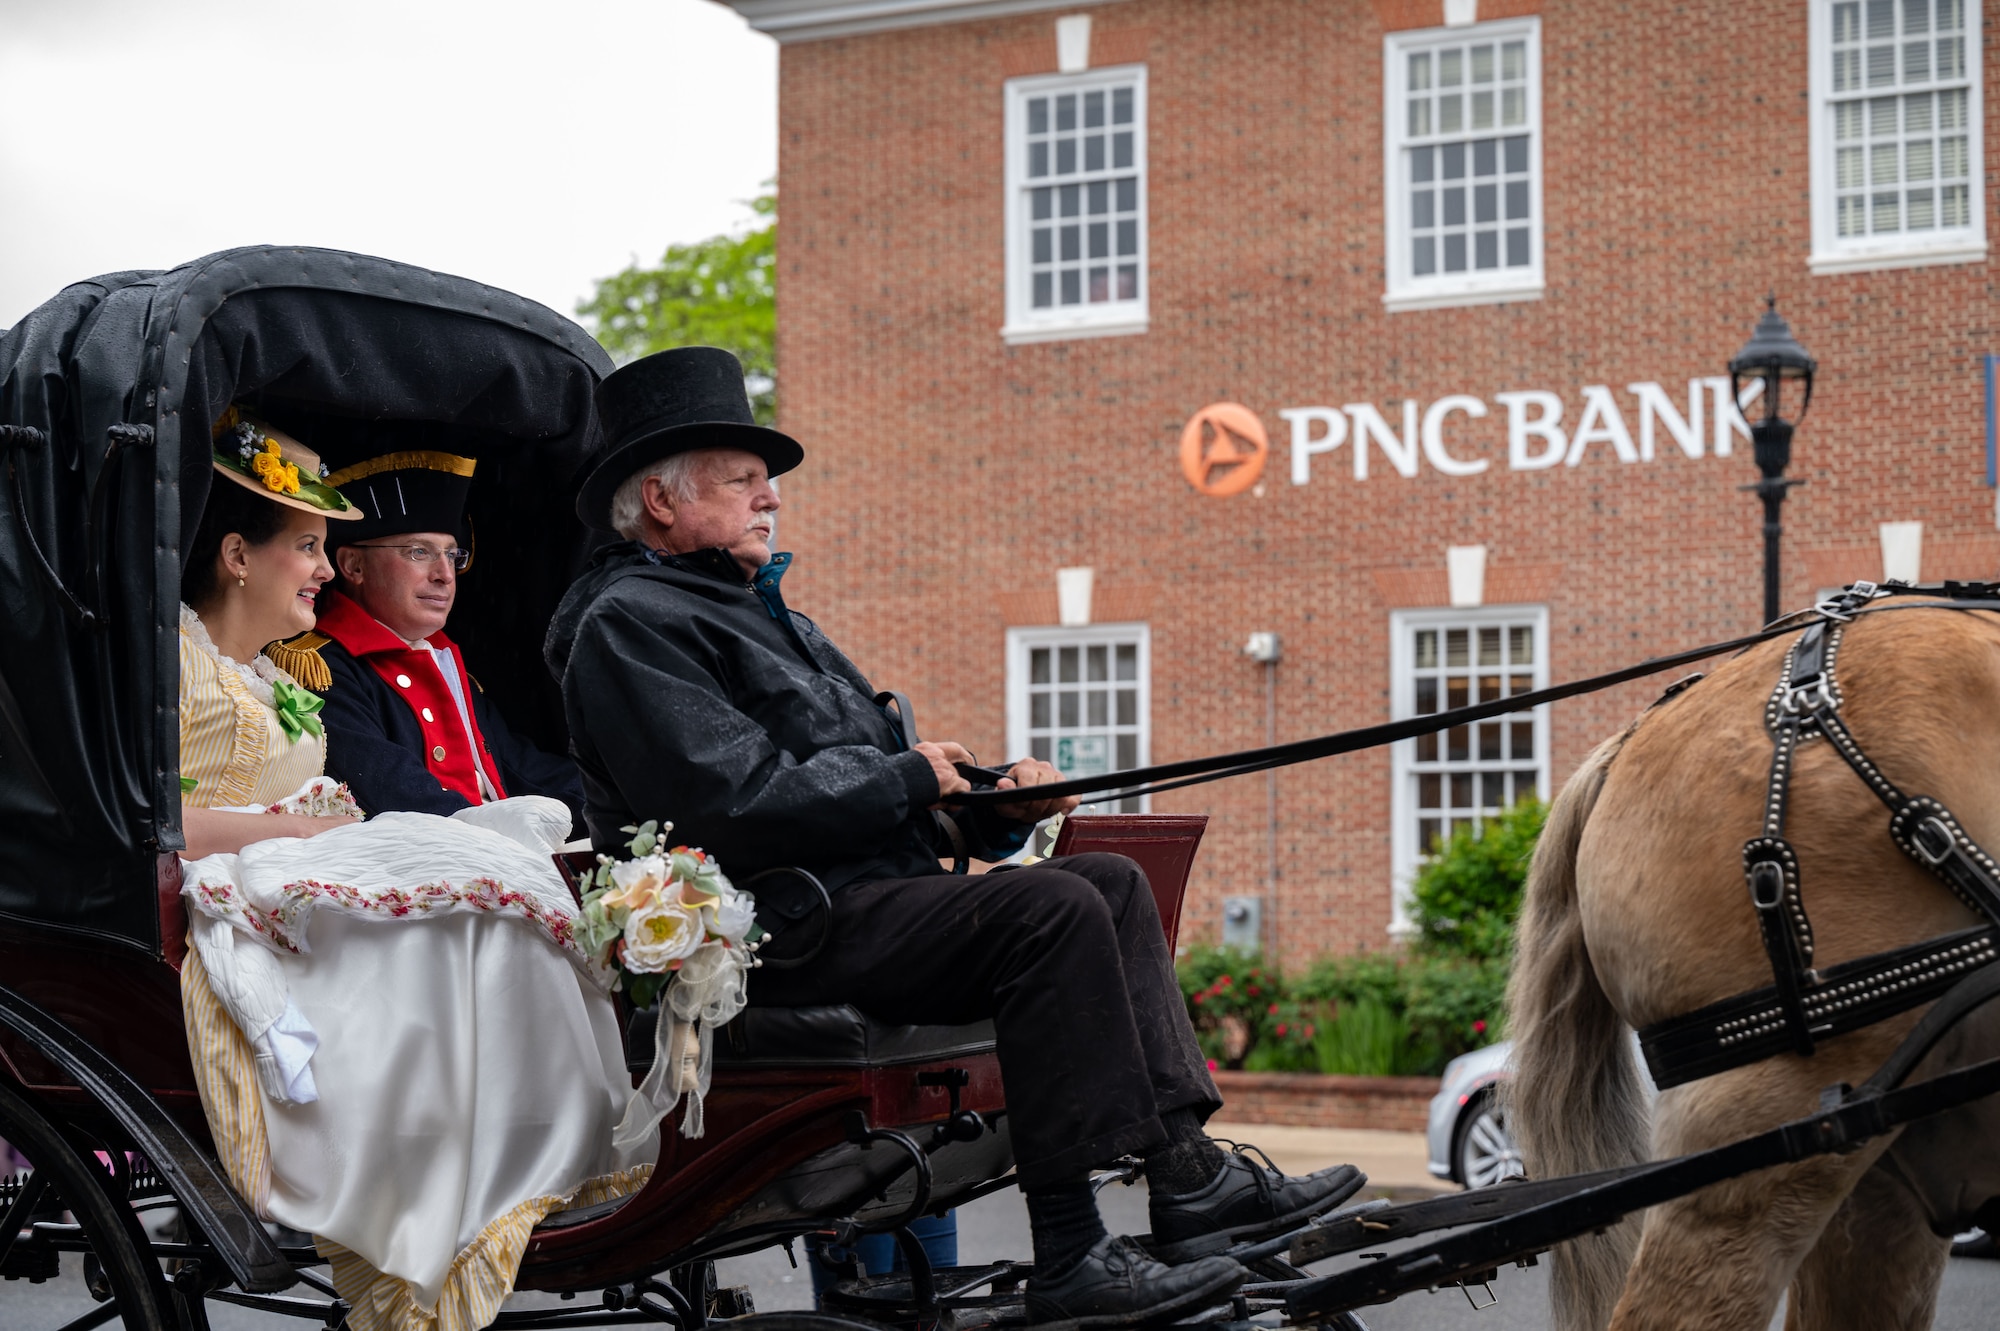 U.S. Air Force Col. Chris McDonald, 436th Airlift Wing commander, and his wife, Diana McDonald, ride in a horse-drawn carriage during the Dover Days Parade in Dover, Delaware, May 4, 2024. The McDonald’s dressed in colonial attire for the 91st Annual Dover Days Festival and Parade, an event that highlights the First State’s history and heritage. (U.S. Air Force photo by Airman 1st Class Amanda Jett)